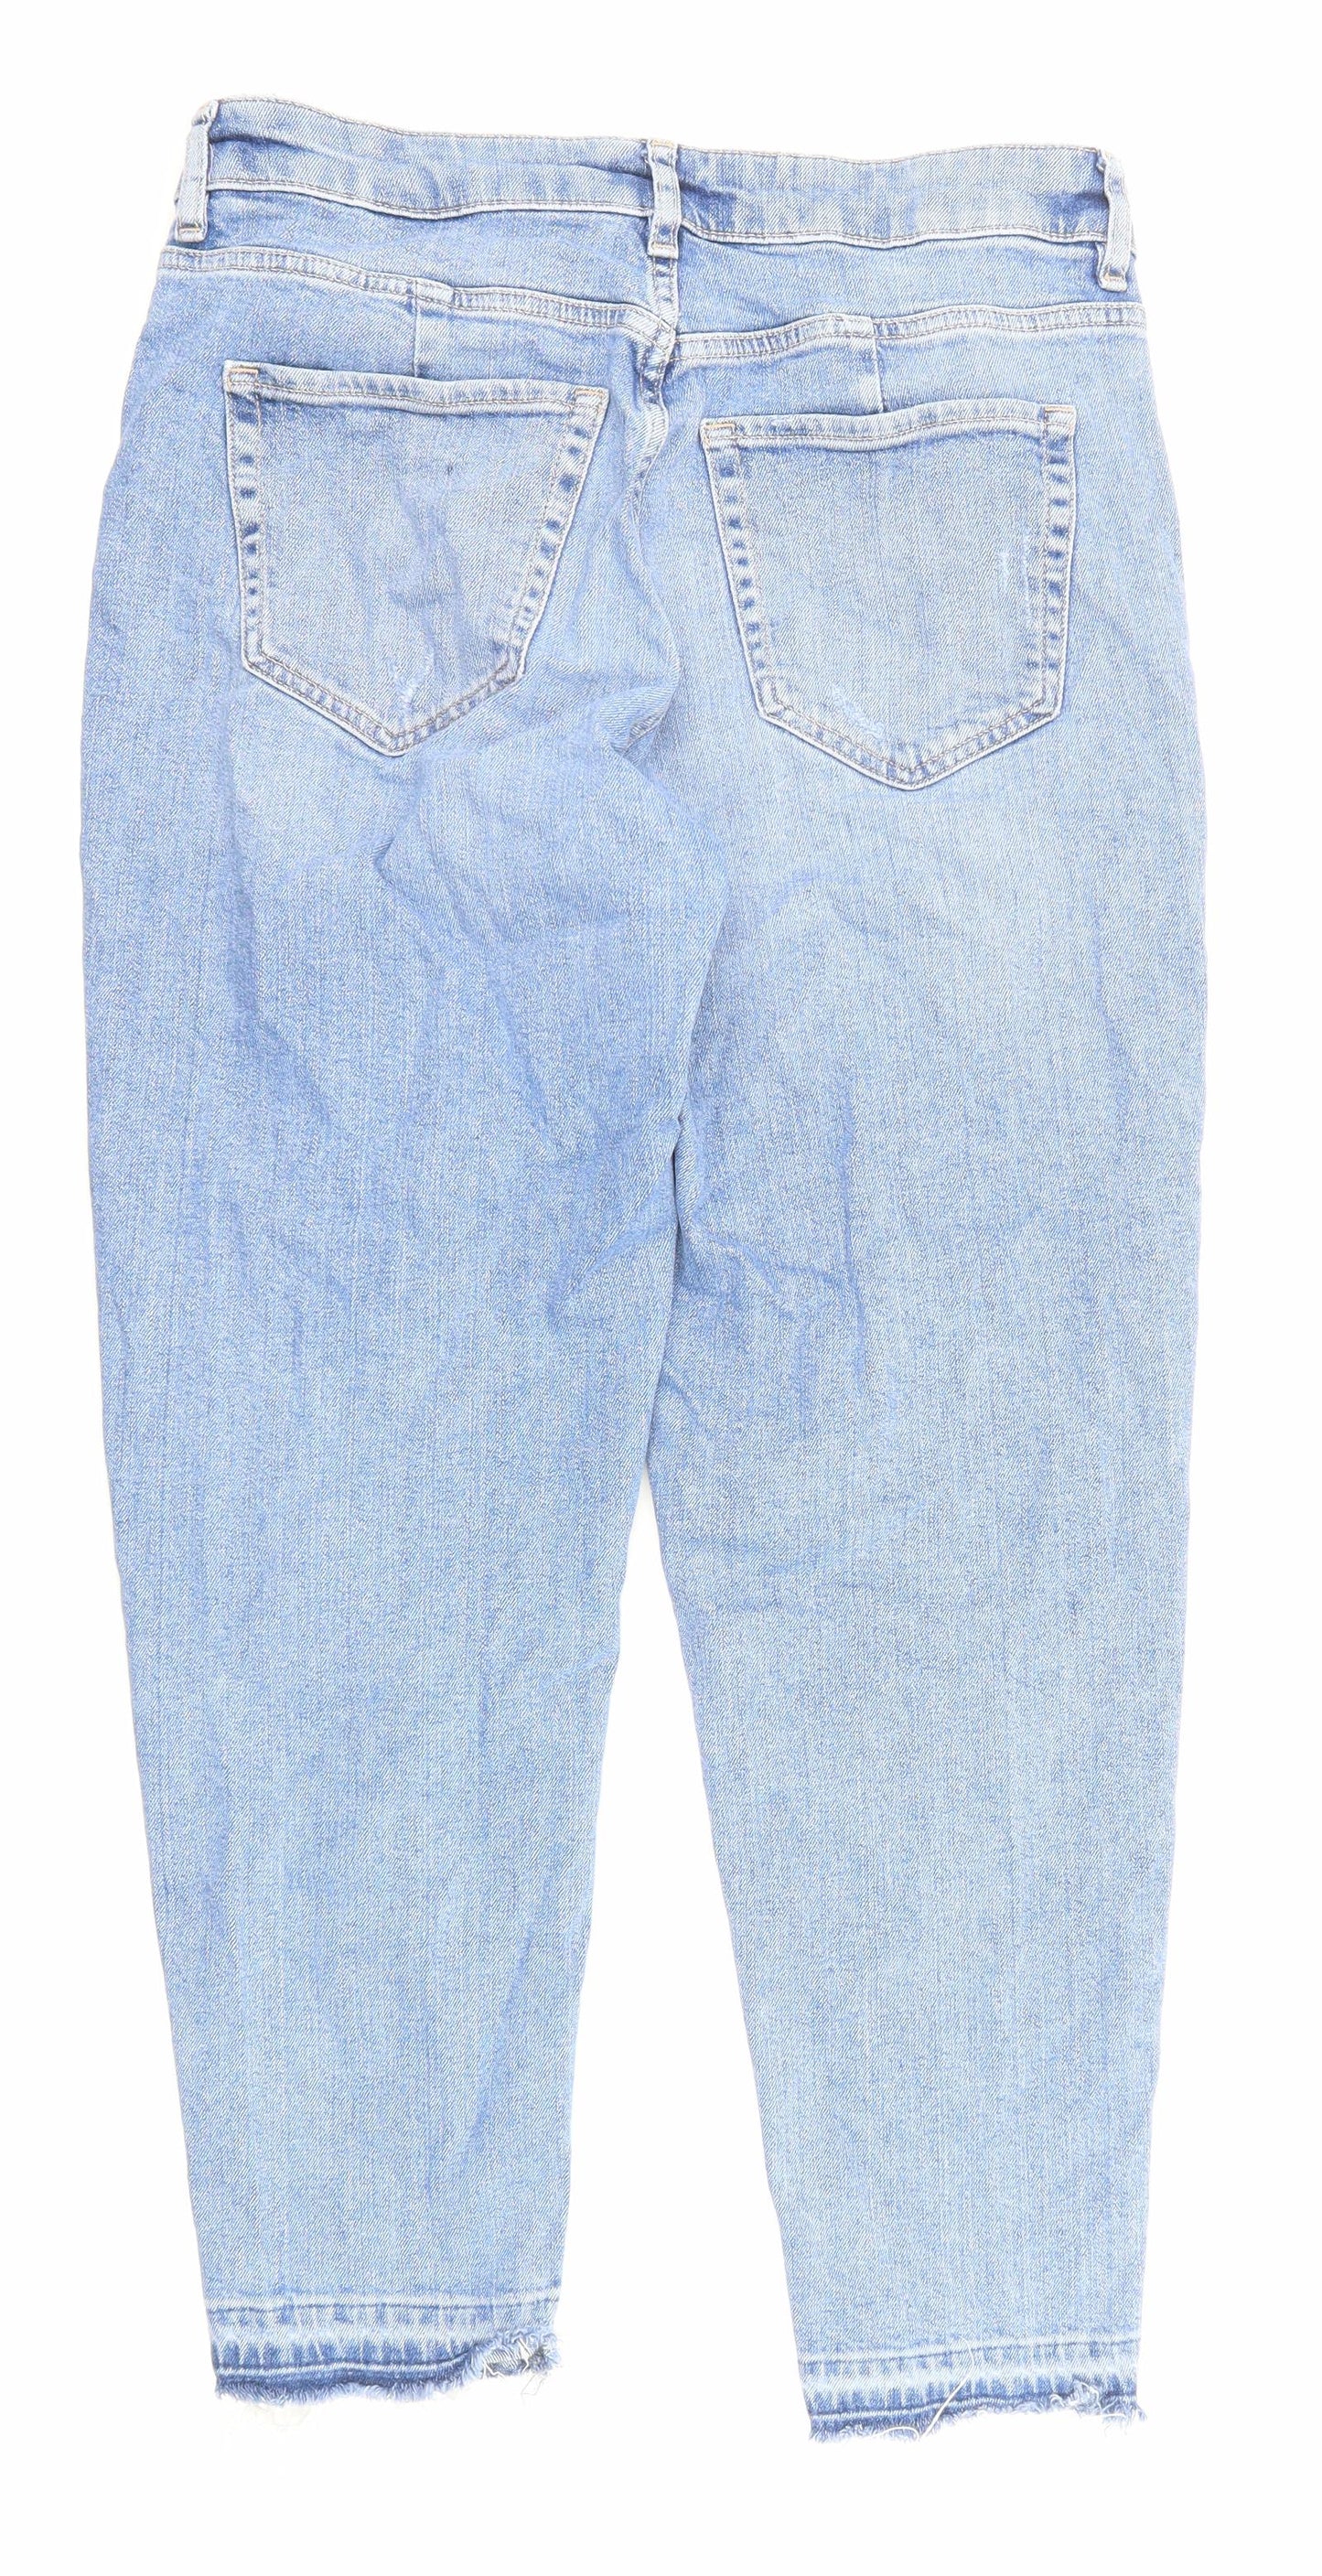 Marks and Spencer Womens Blue Cotton Mom Jeans Size 12 Regular Zip